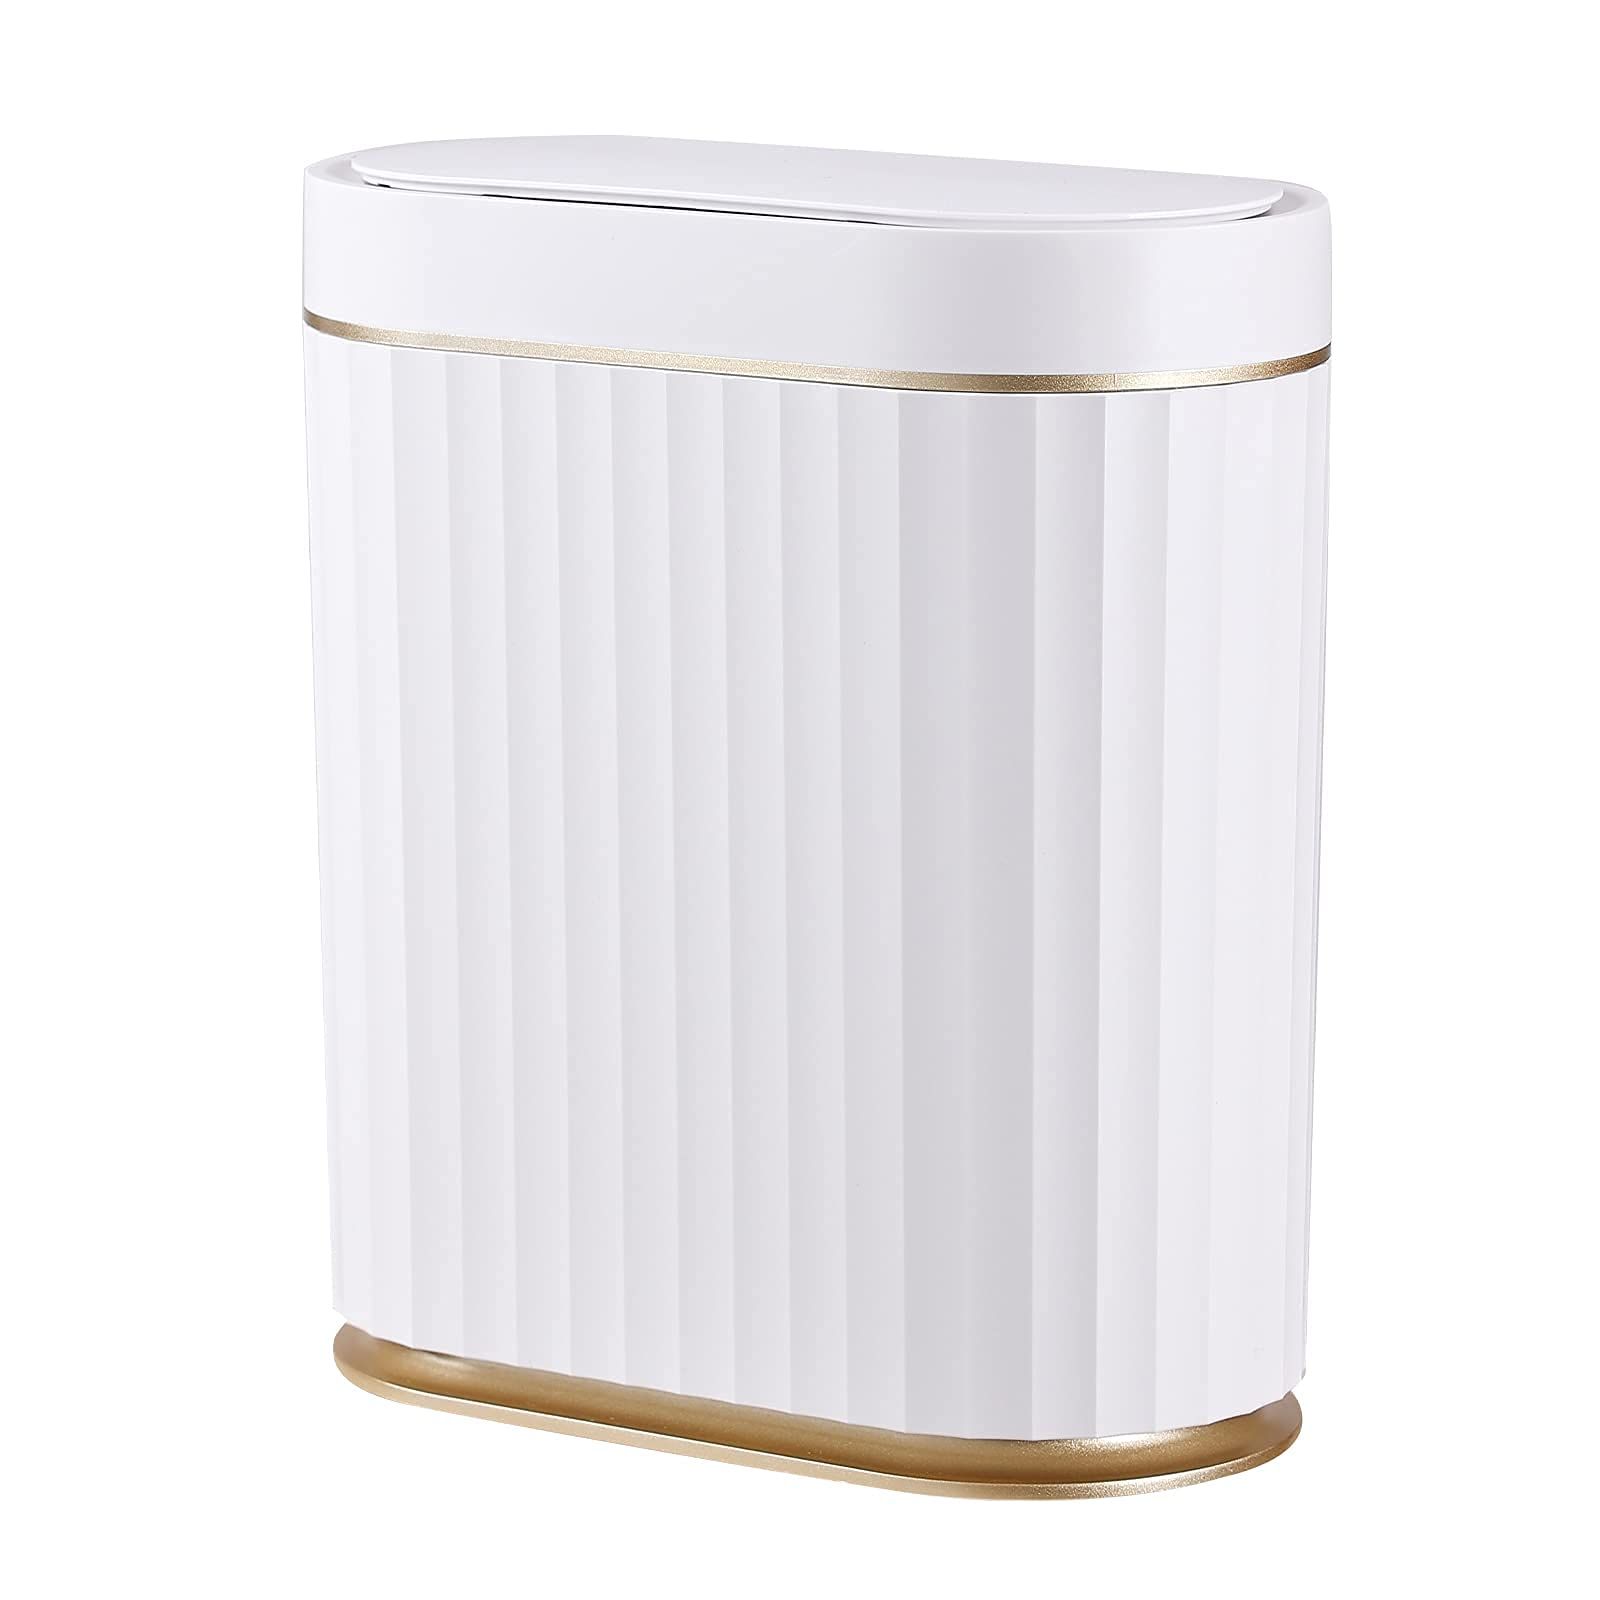 Bathroom Trash Can with Lid - ELPHECO Automatic Garbage Can, 2 Gallon Slim Smart Trash Can, Small Pl | Amazon (US)